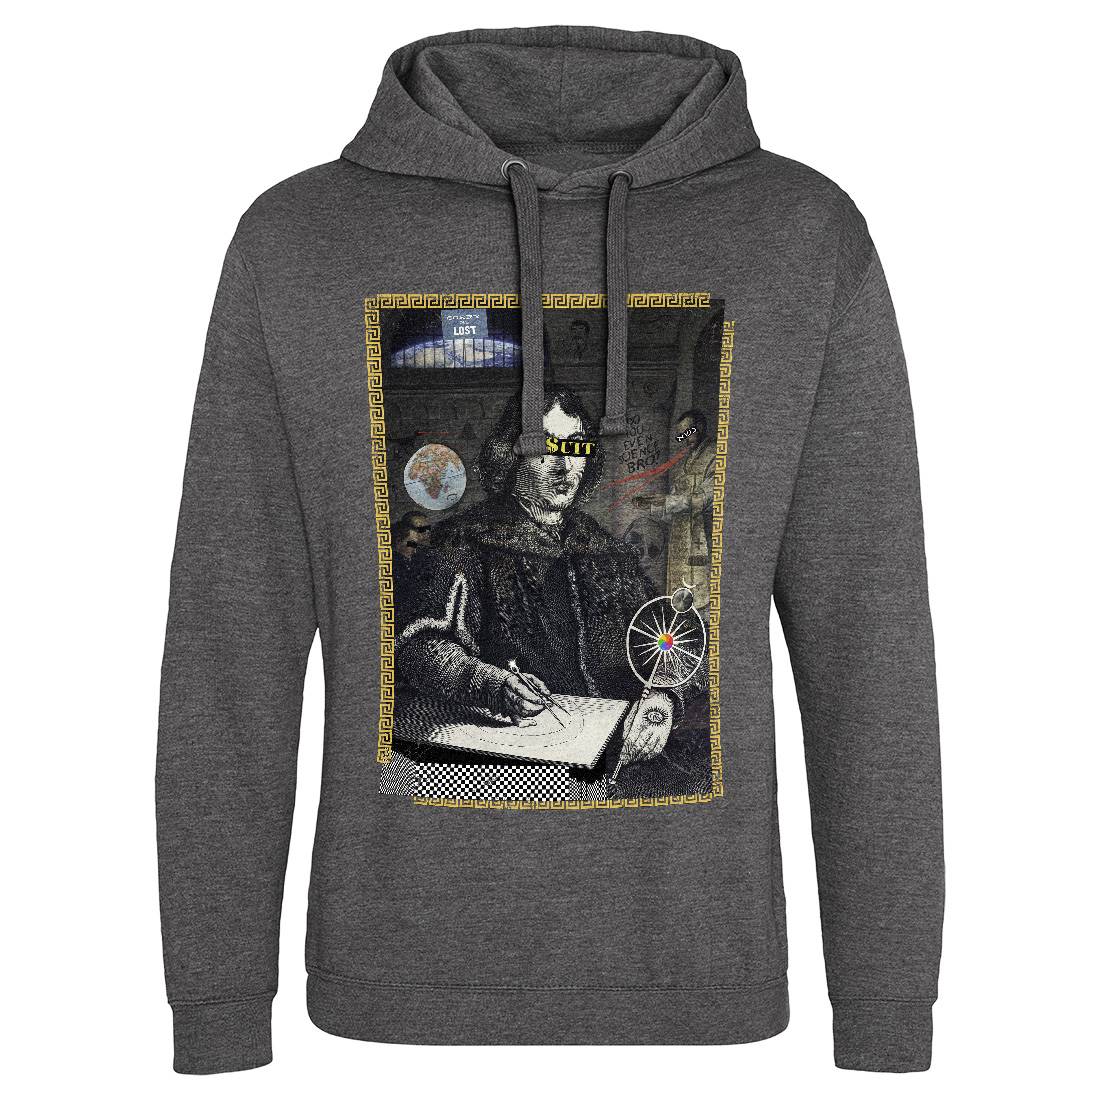 Scientism 101 Mens Hoodie Without Pocket Illuminati A902